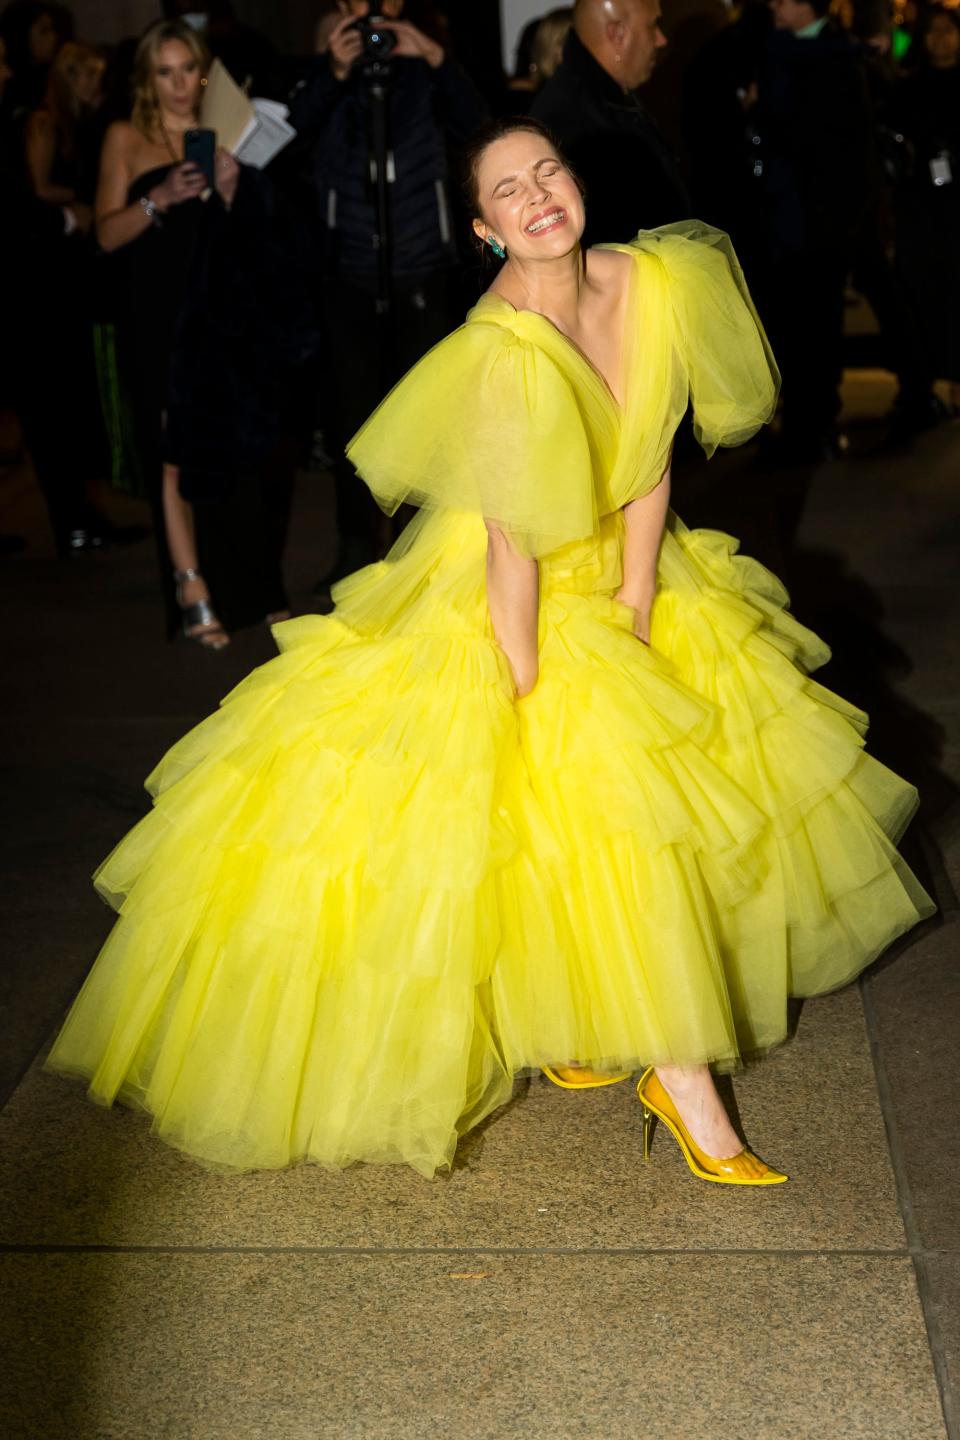 Barrymore wearing a lemon yellow tulle puff dress and yellow heels.